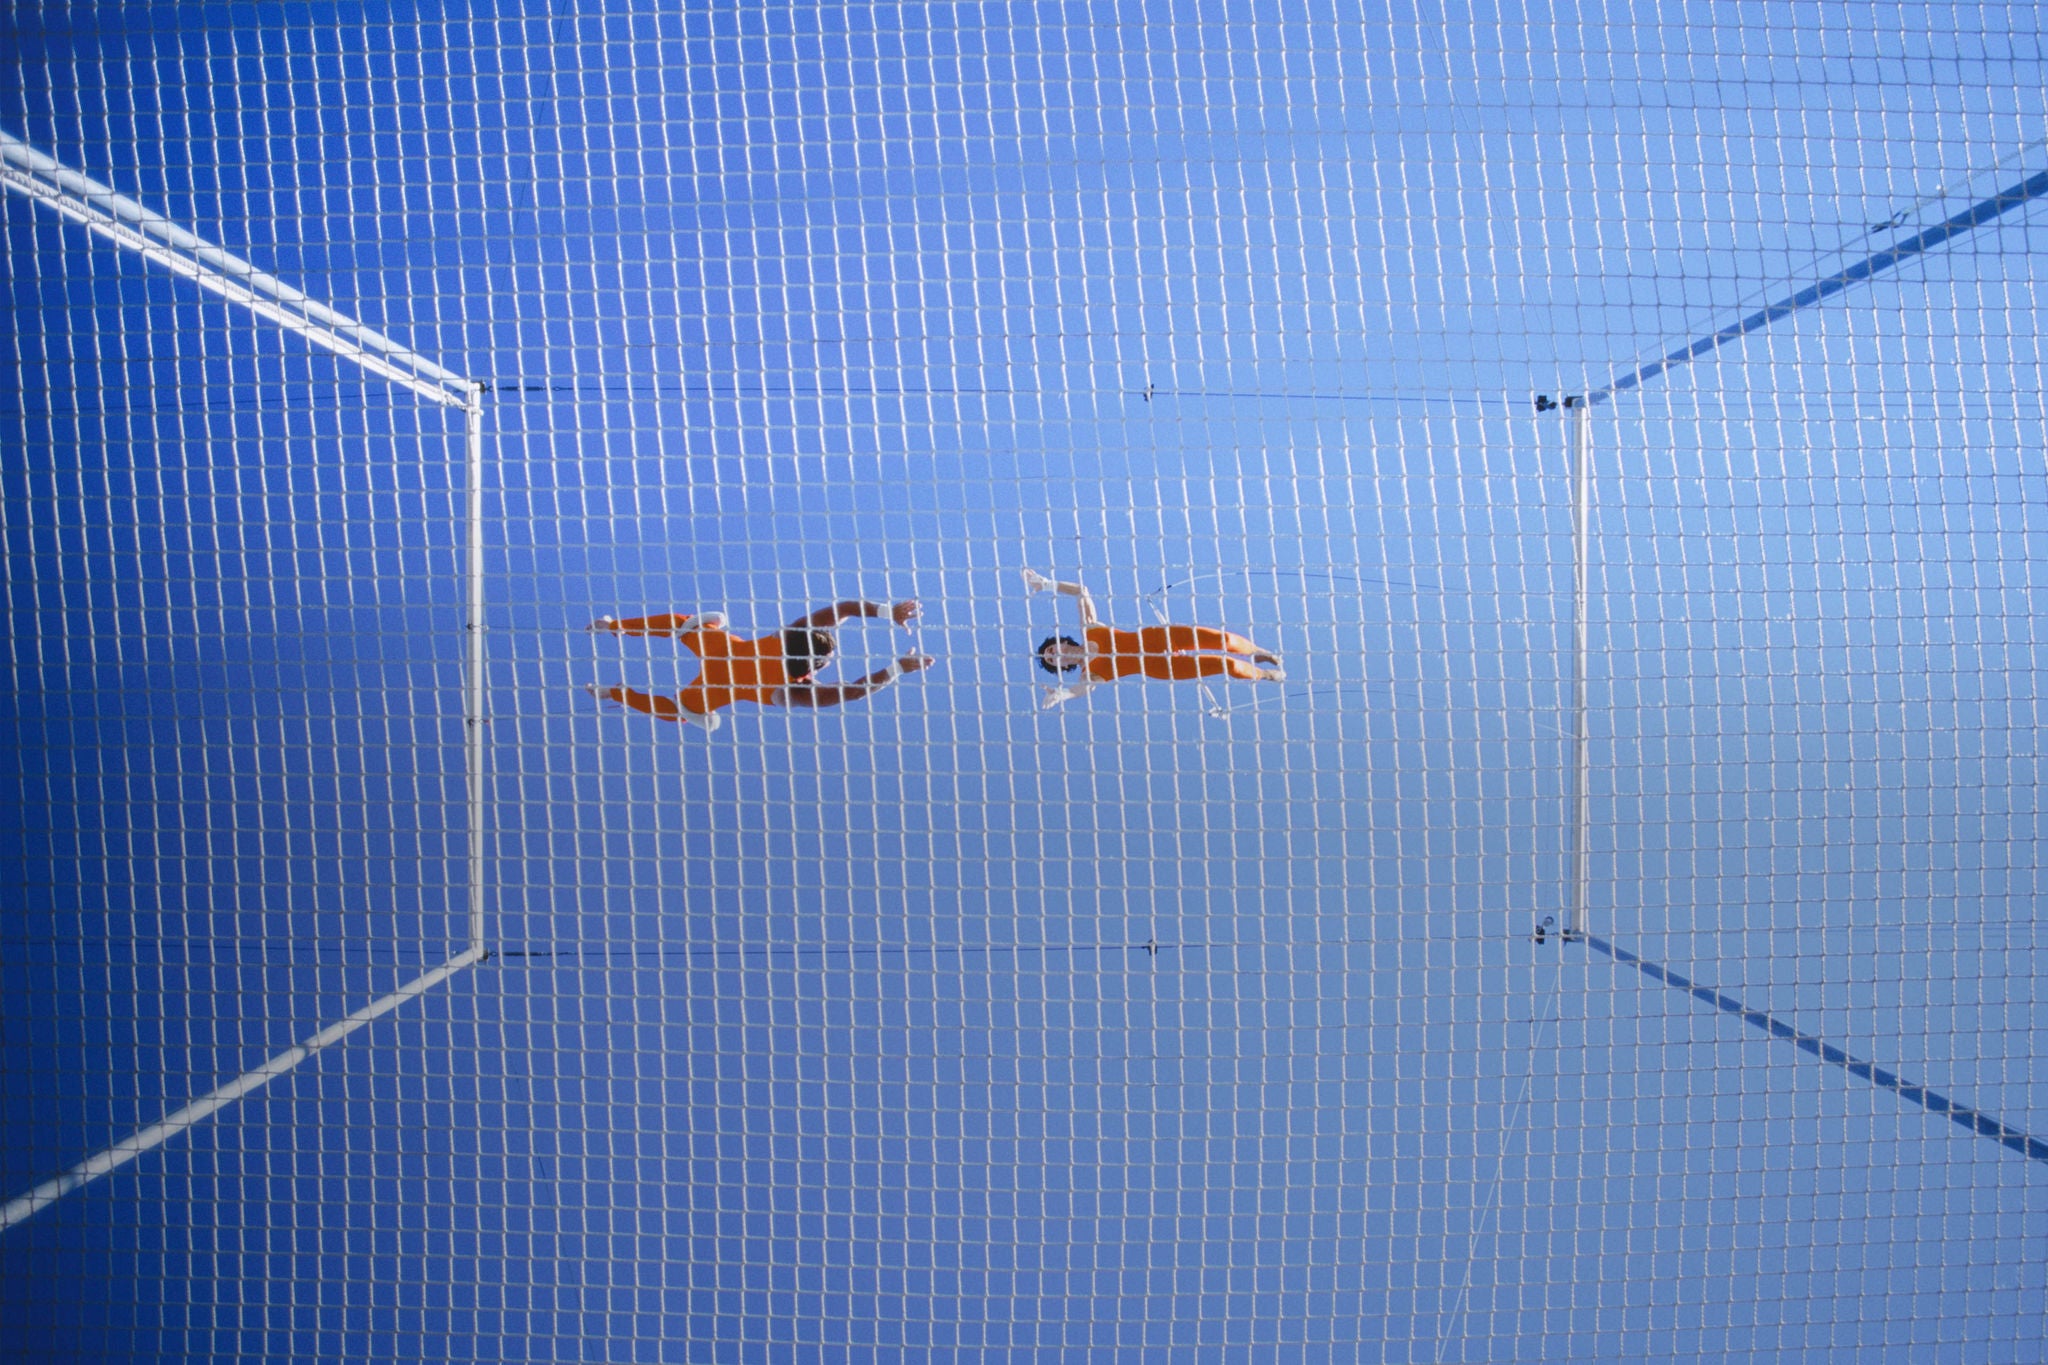 Two trapeze artists performing release move